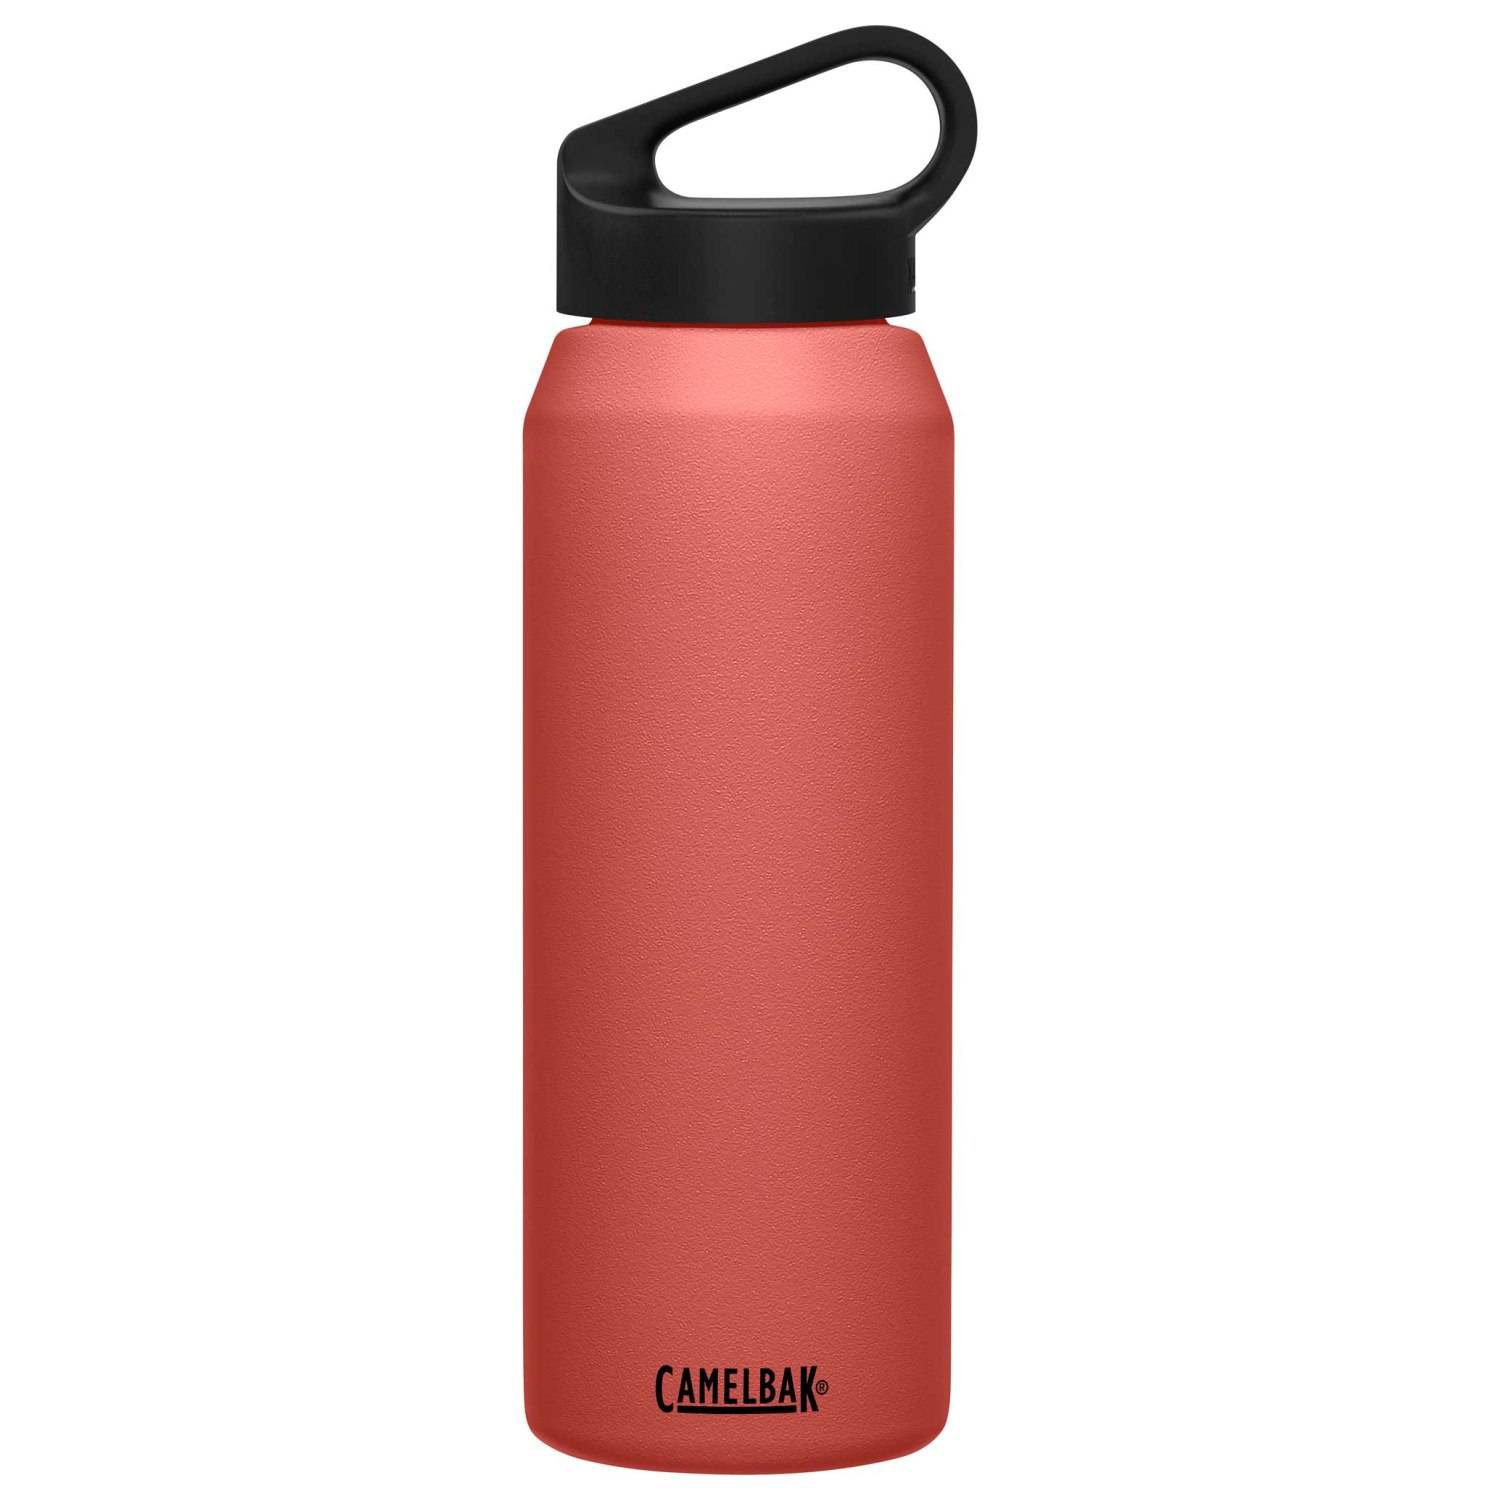 Camelbak Carry Cap 1L Insulated Stainless Steel Bottle